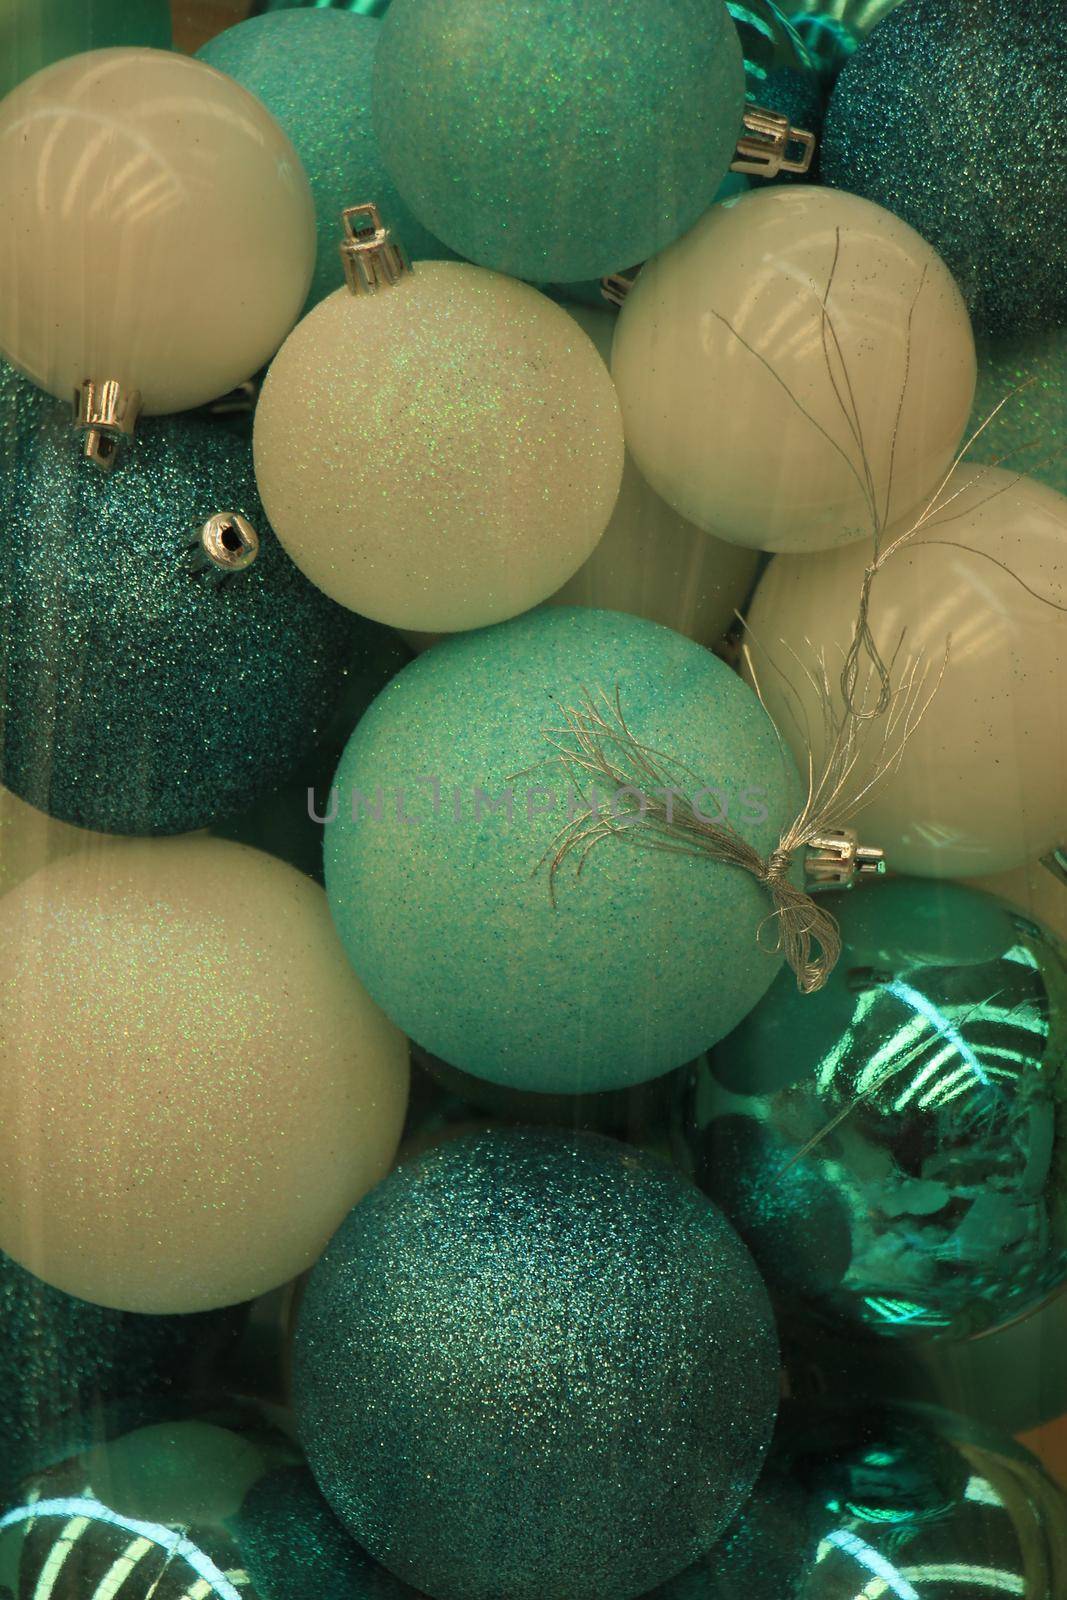 Christmas ornaments in teal and pastel blue colors in a christmas retail shop